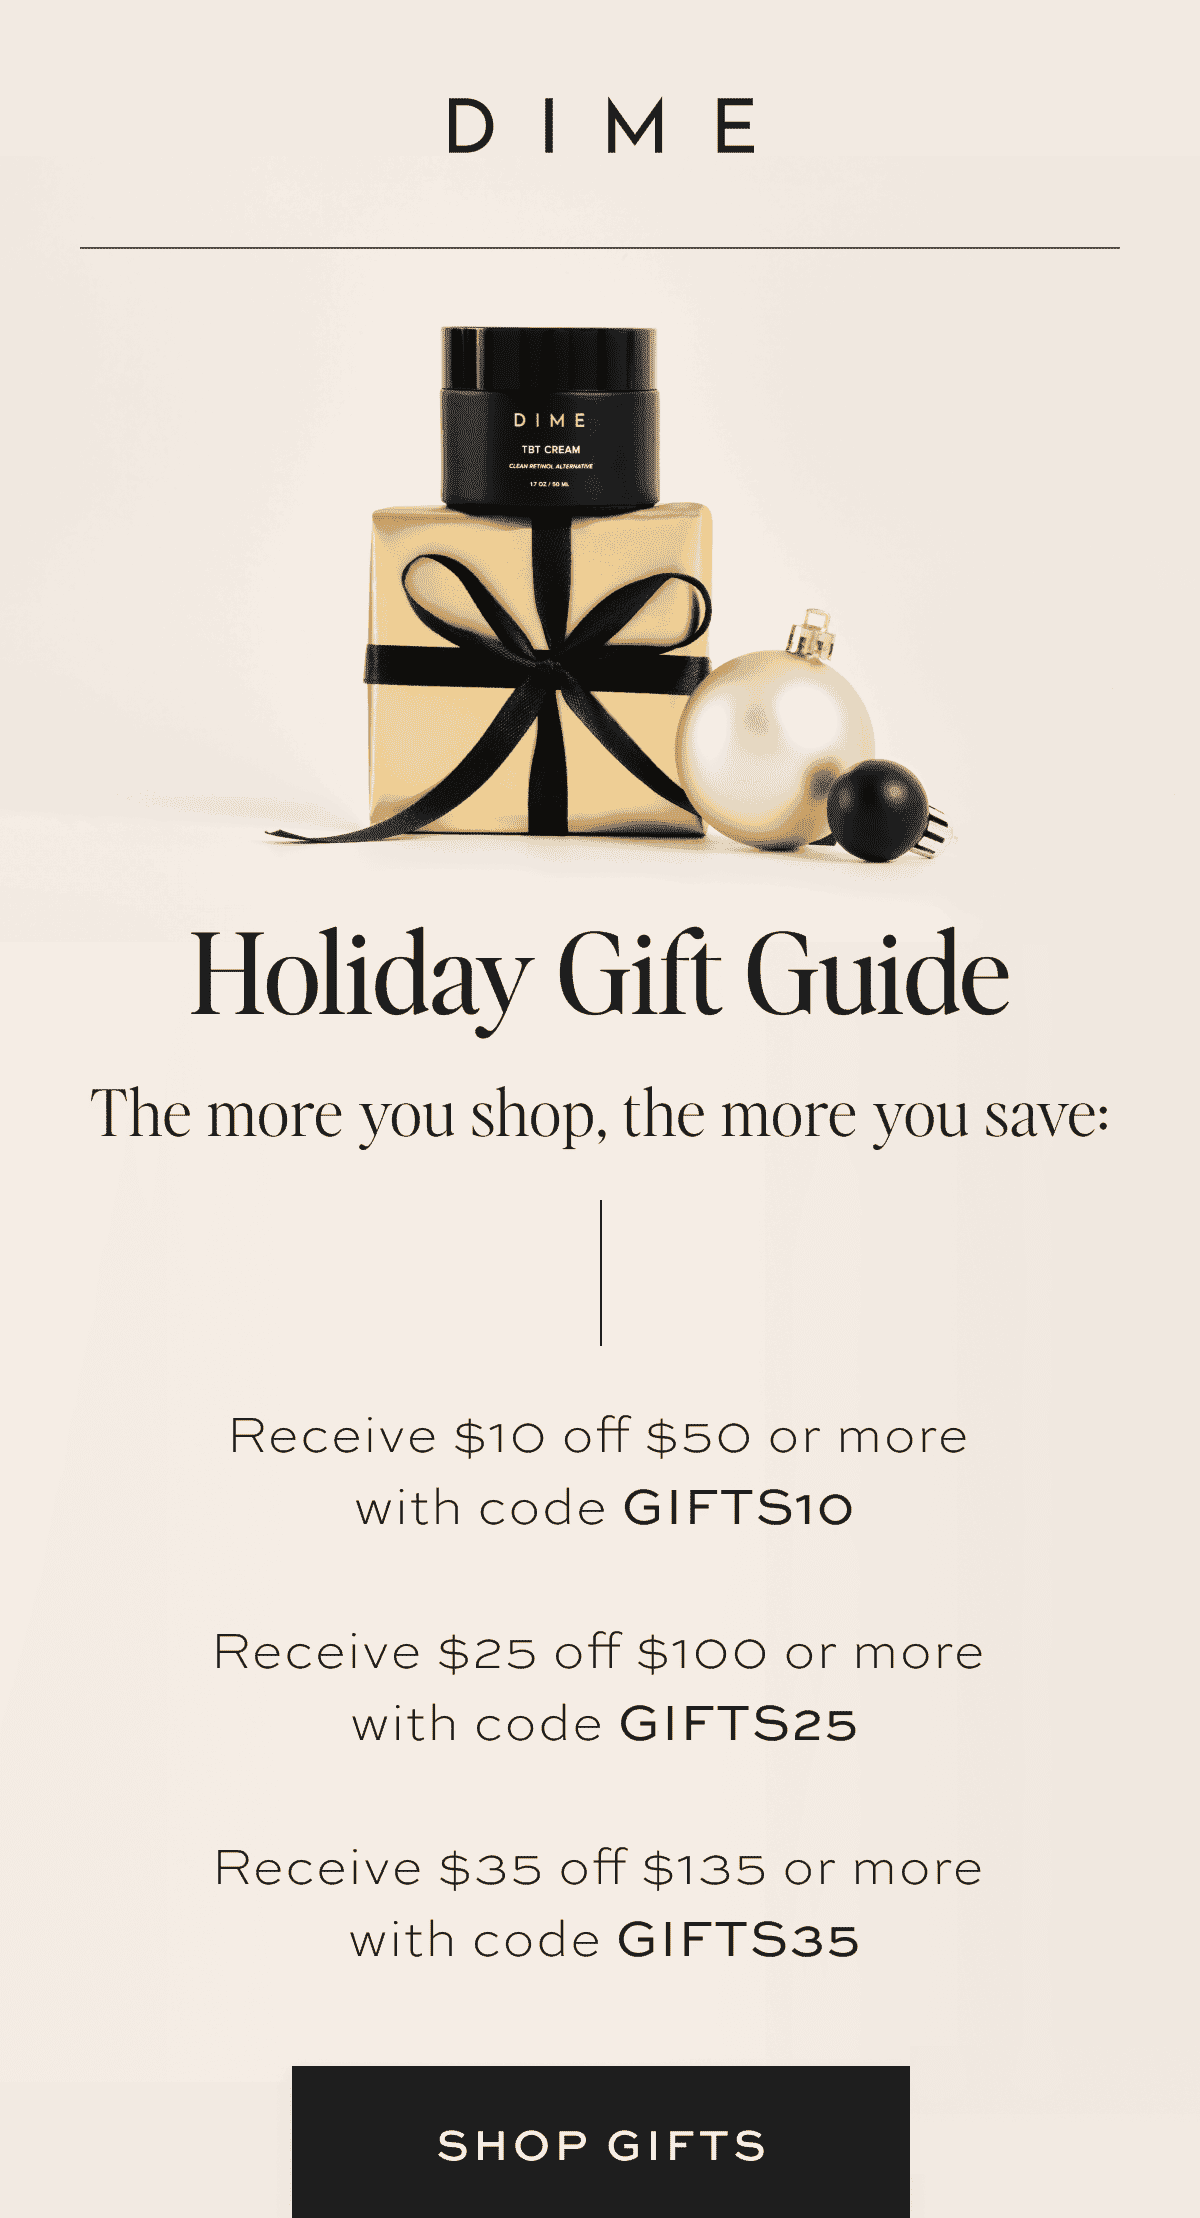 The more you shop, the more you save: Receive \\$10 off \\$50 or more with code GIFTS10 Receive \\$25 off \\$100 or more with code GIFTS25 Receive \\$35 off \\$135 or more with code GIFTS35